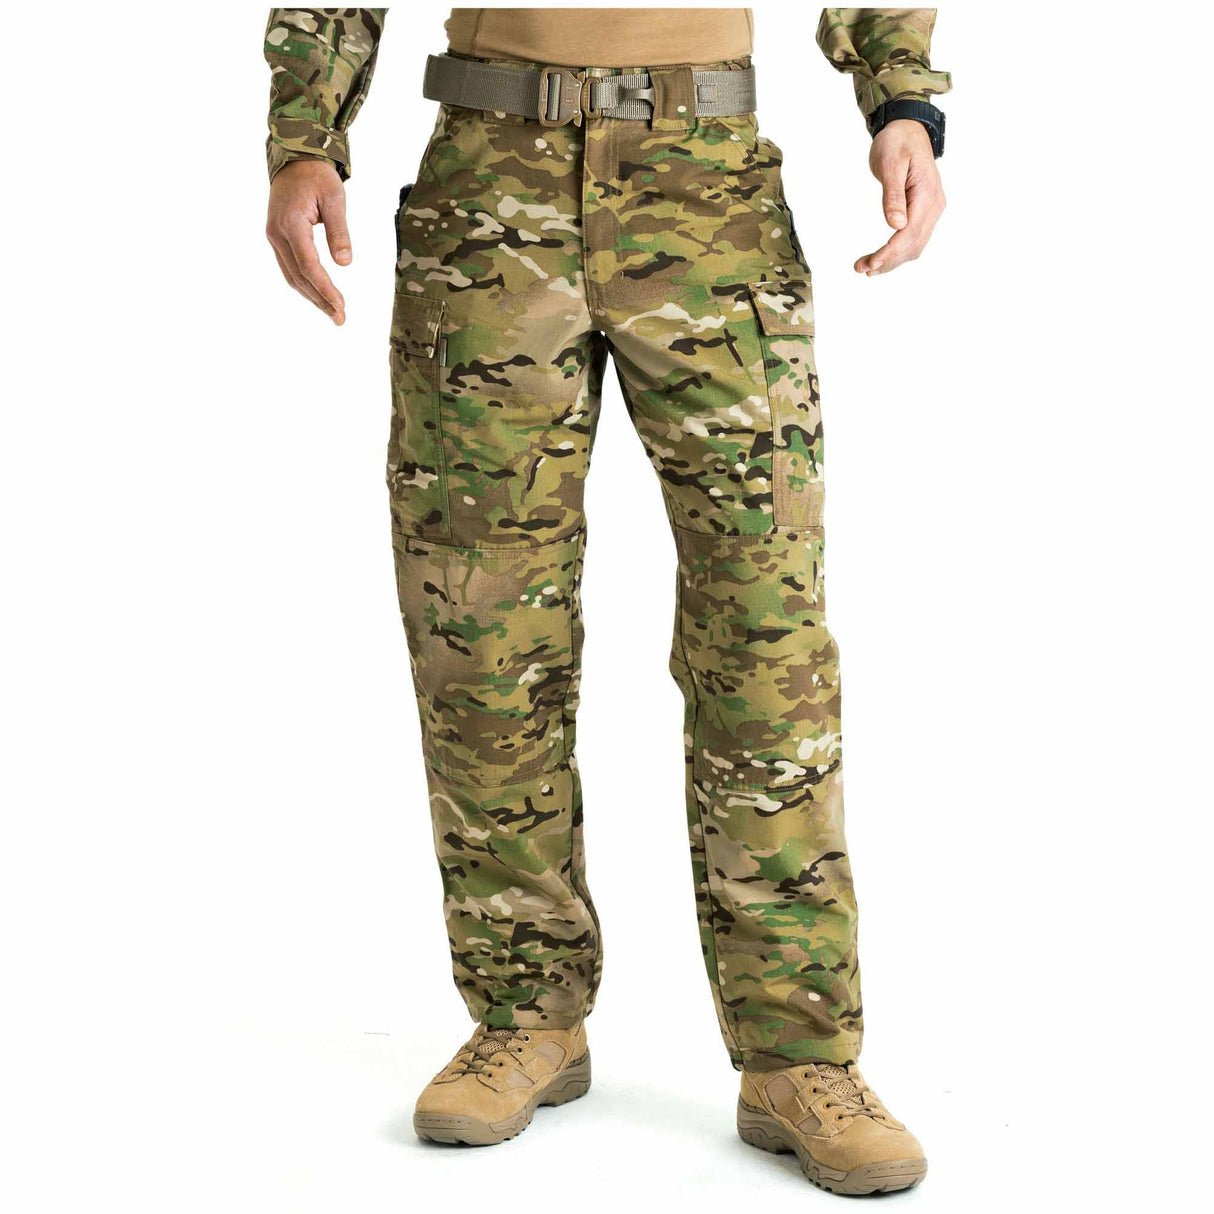 Functional Duty Wear Pant: Designed for optimal performance and functionality.